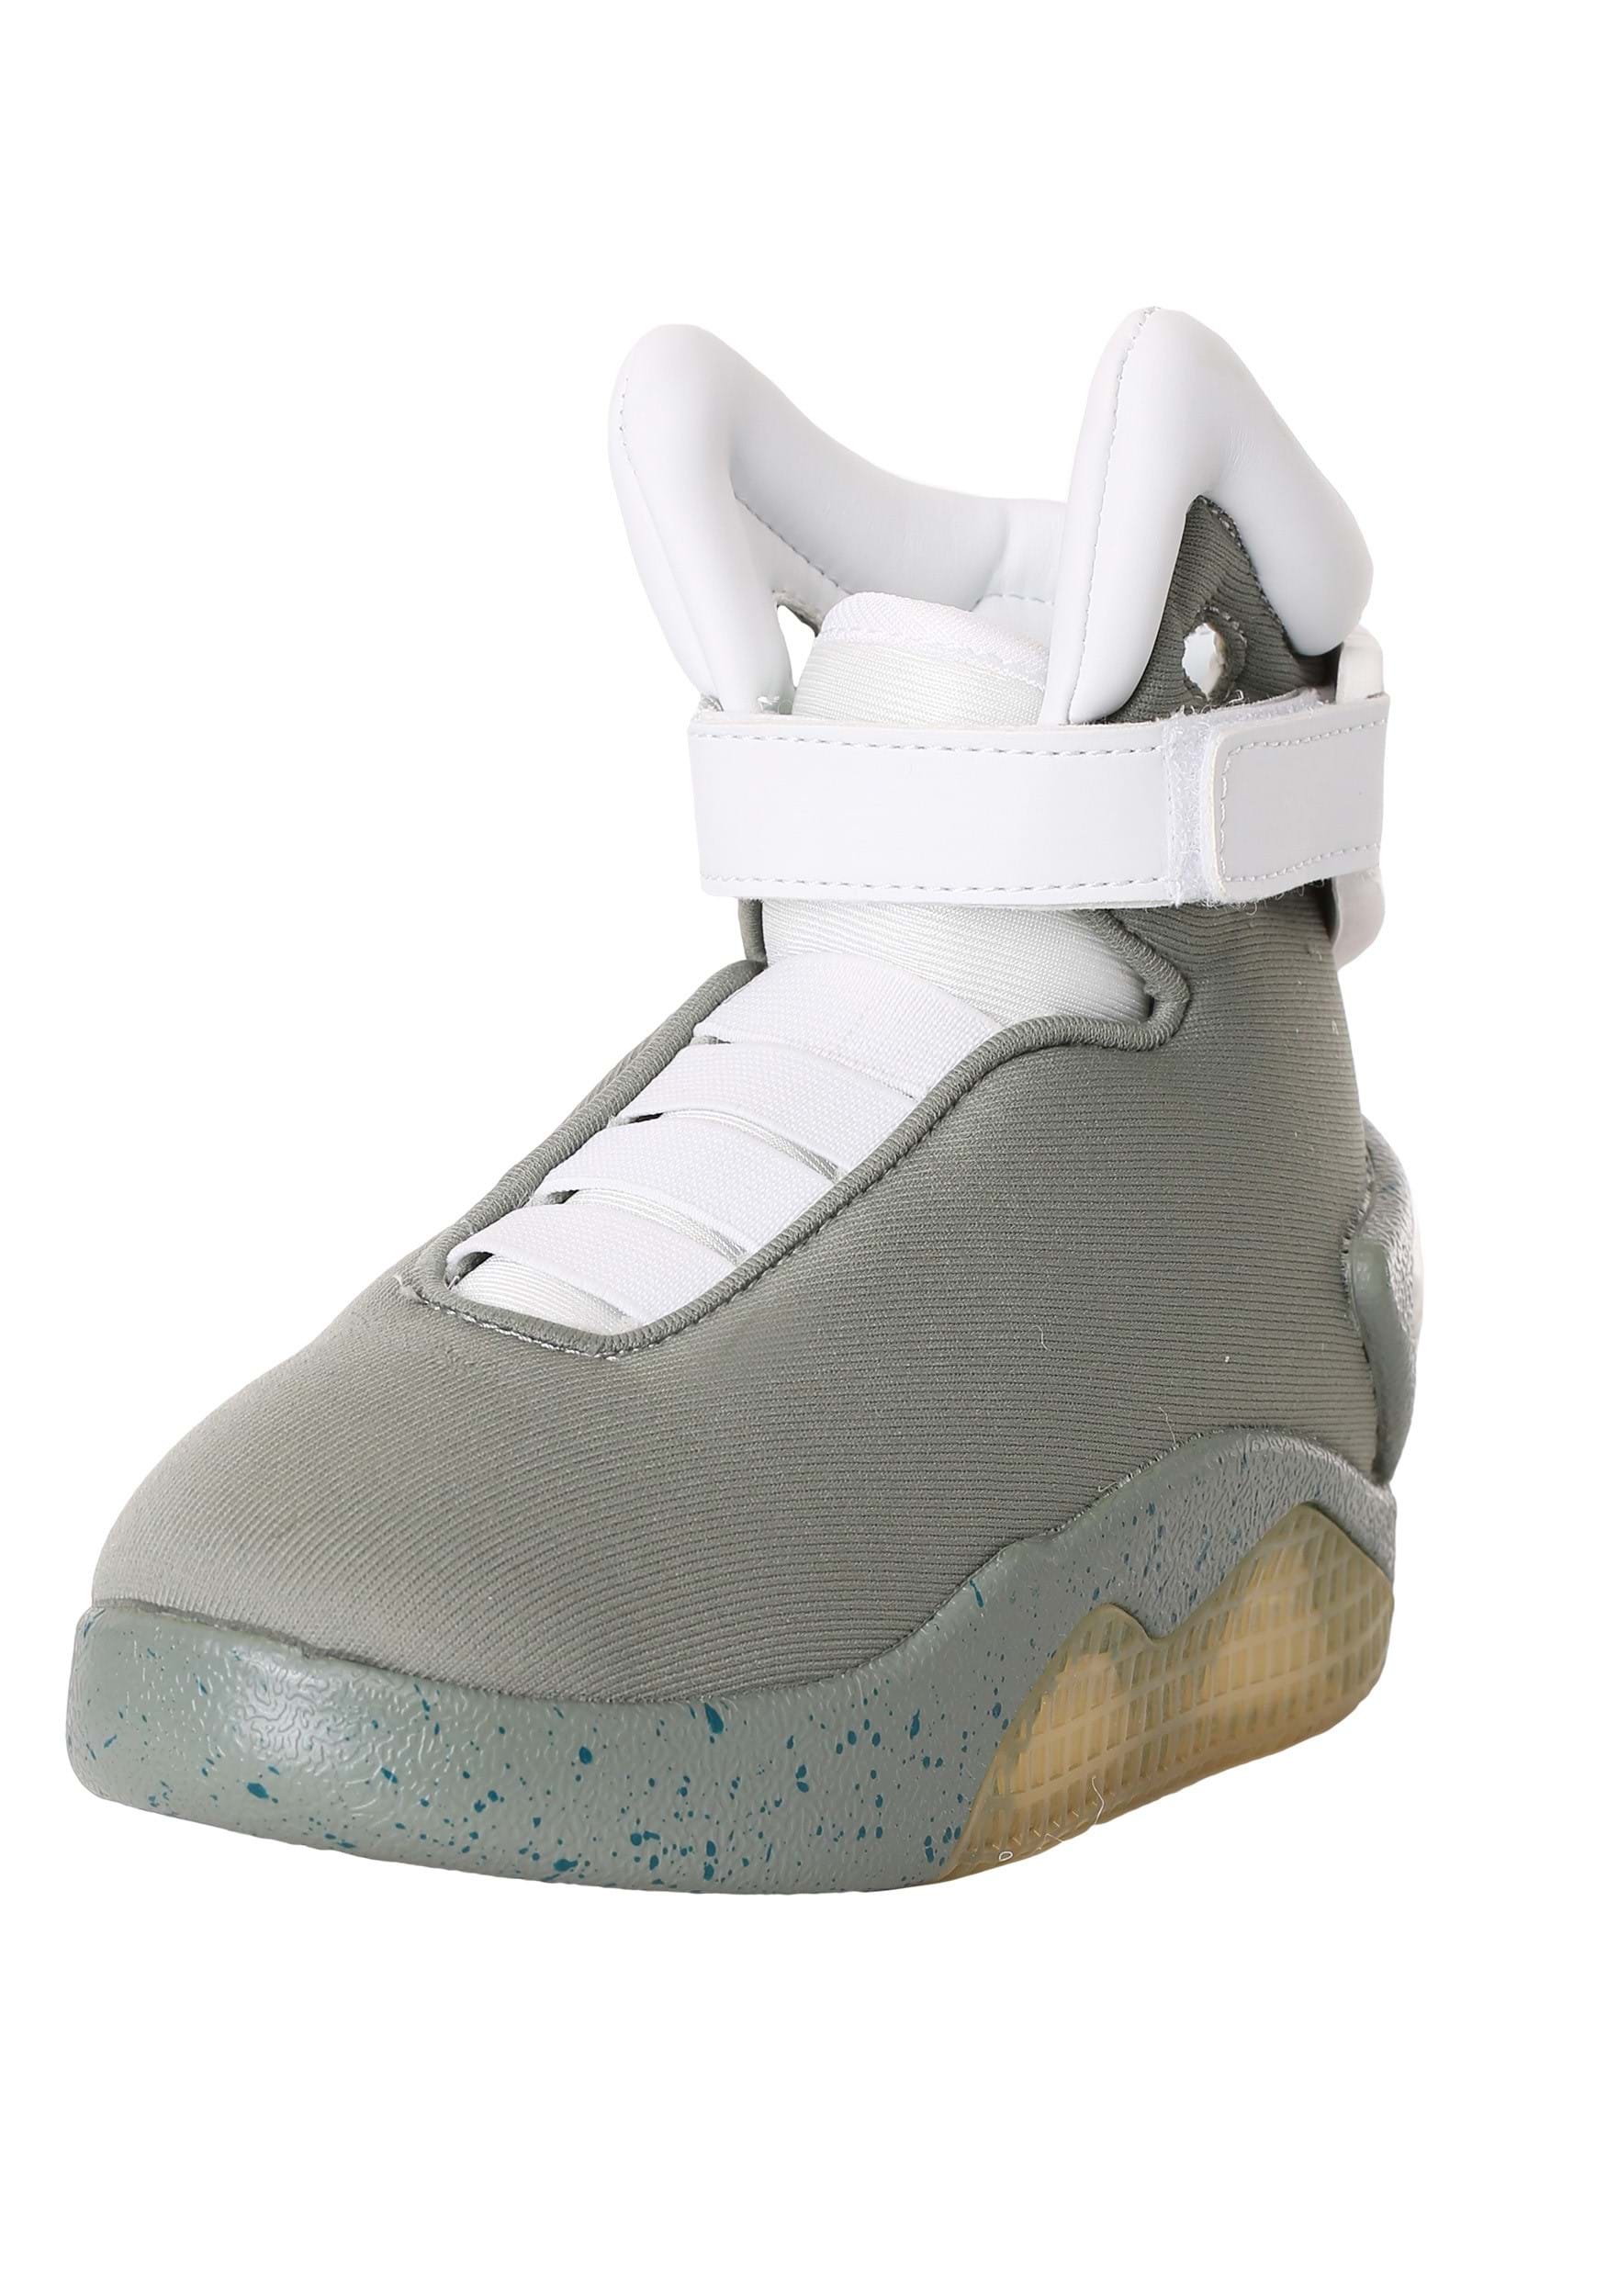 Image of Light Up Back to the Future Kid's Shoes ID BTF2247CH-13